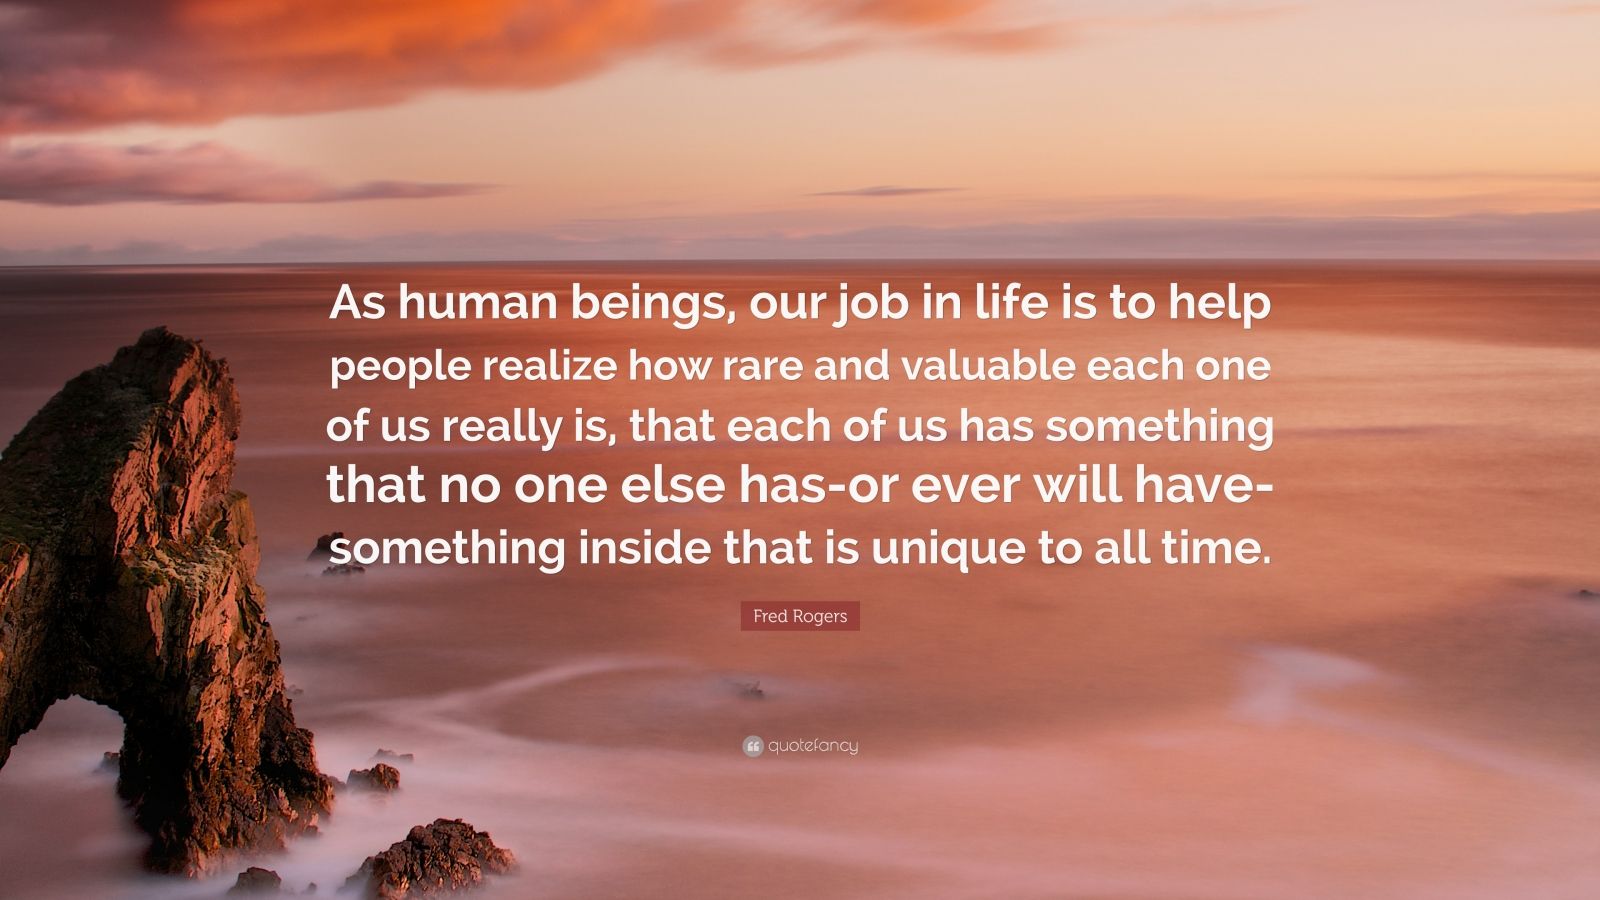 Fred Rogers Quote: “As human beings, our job in life is to help people